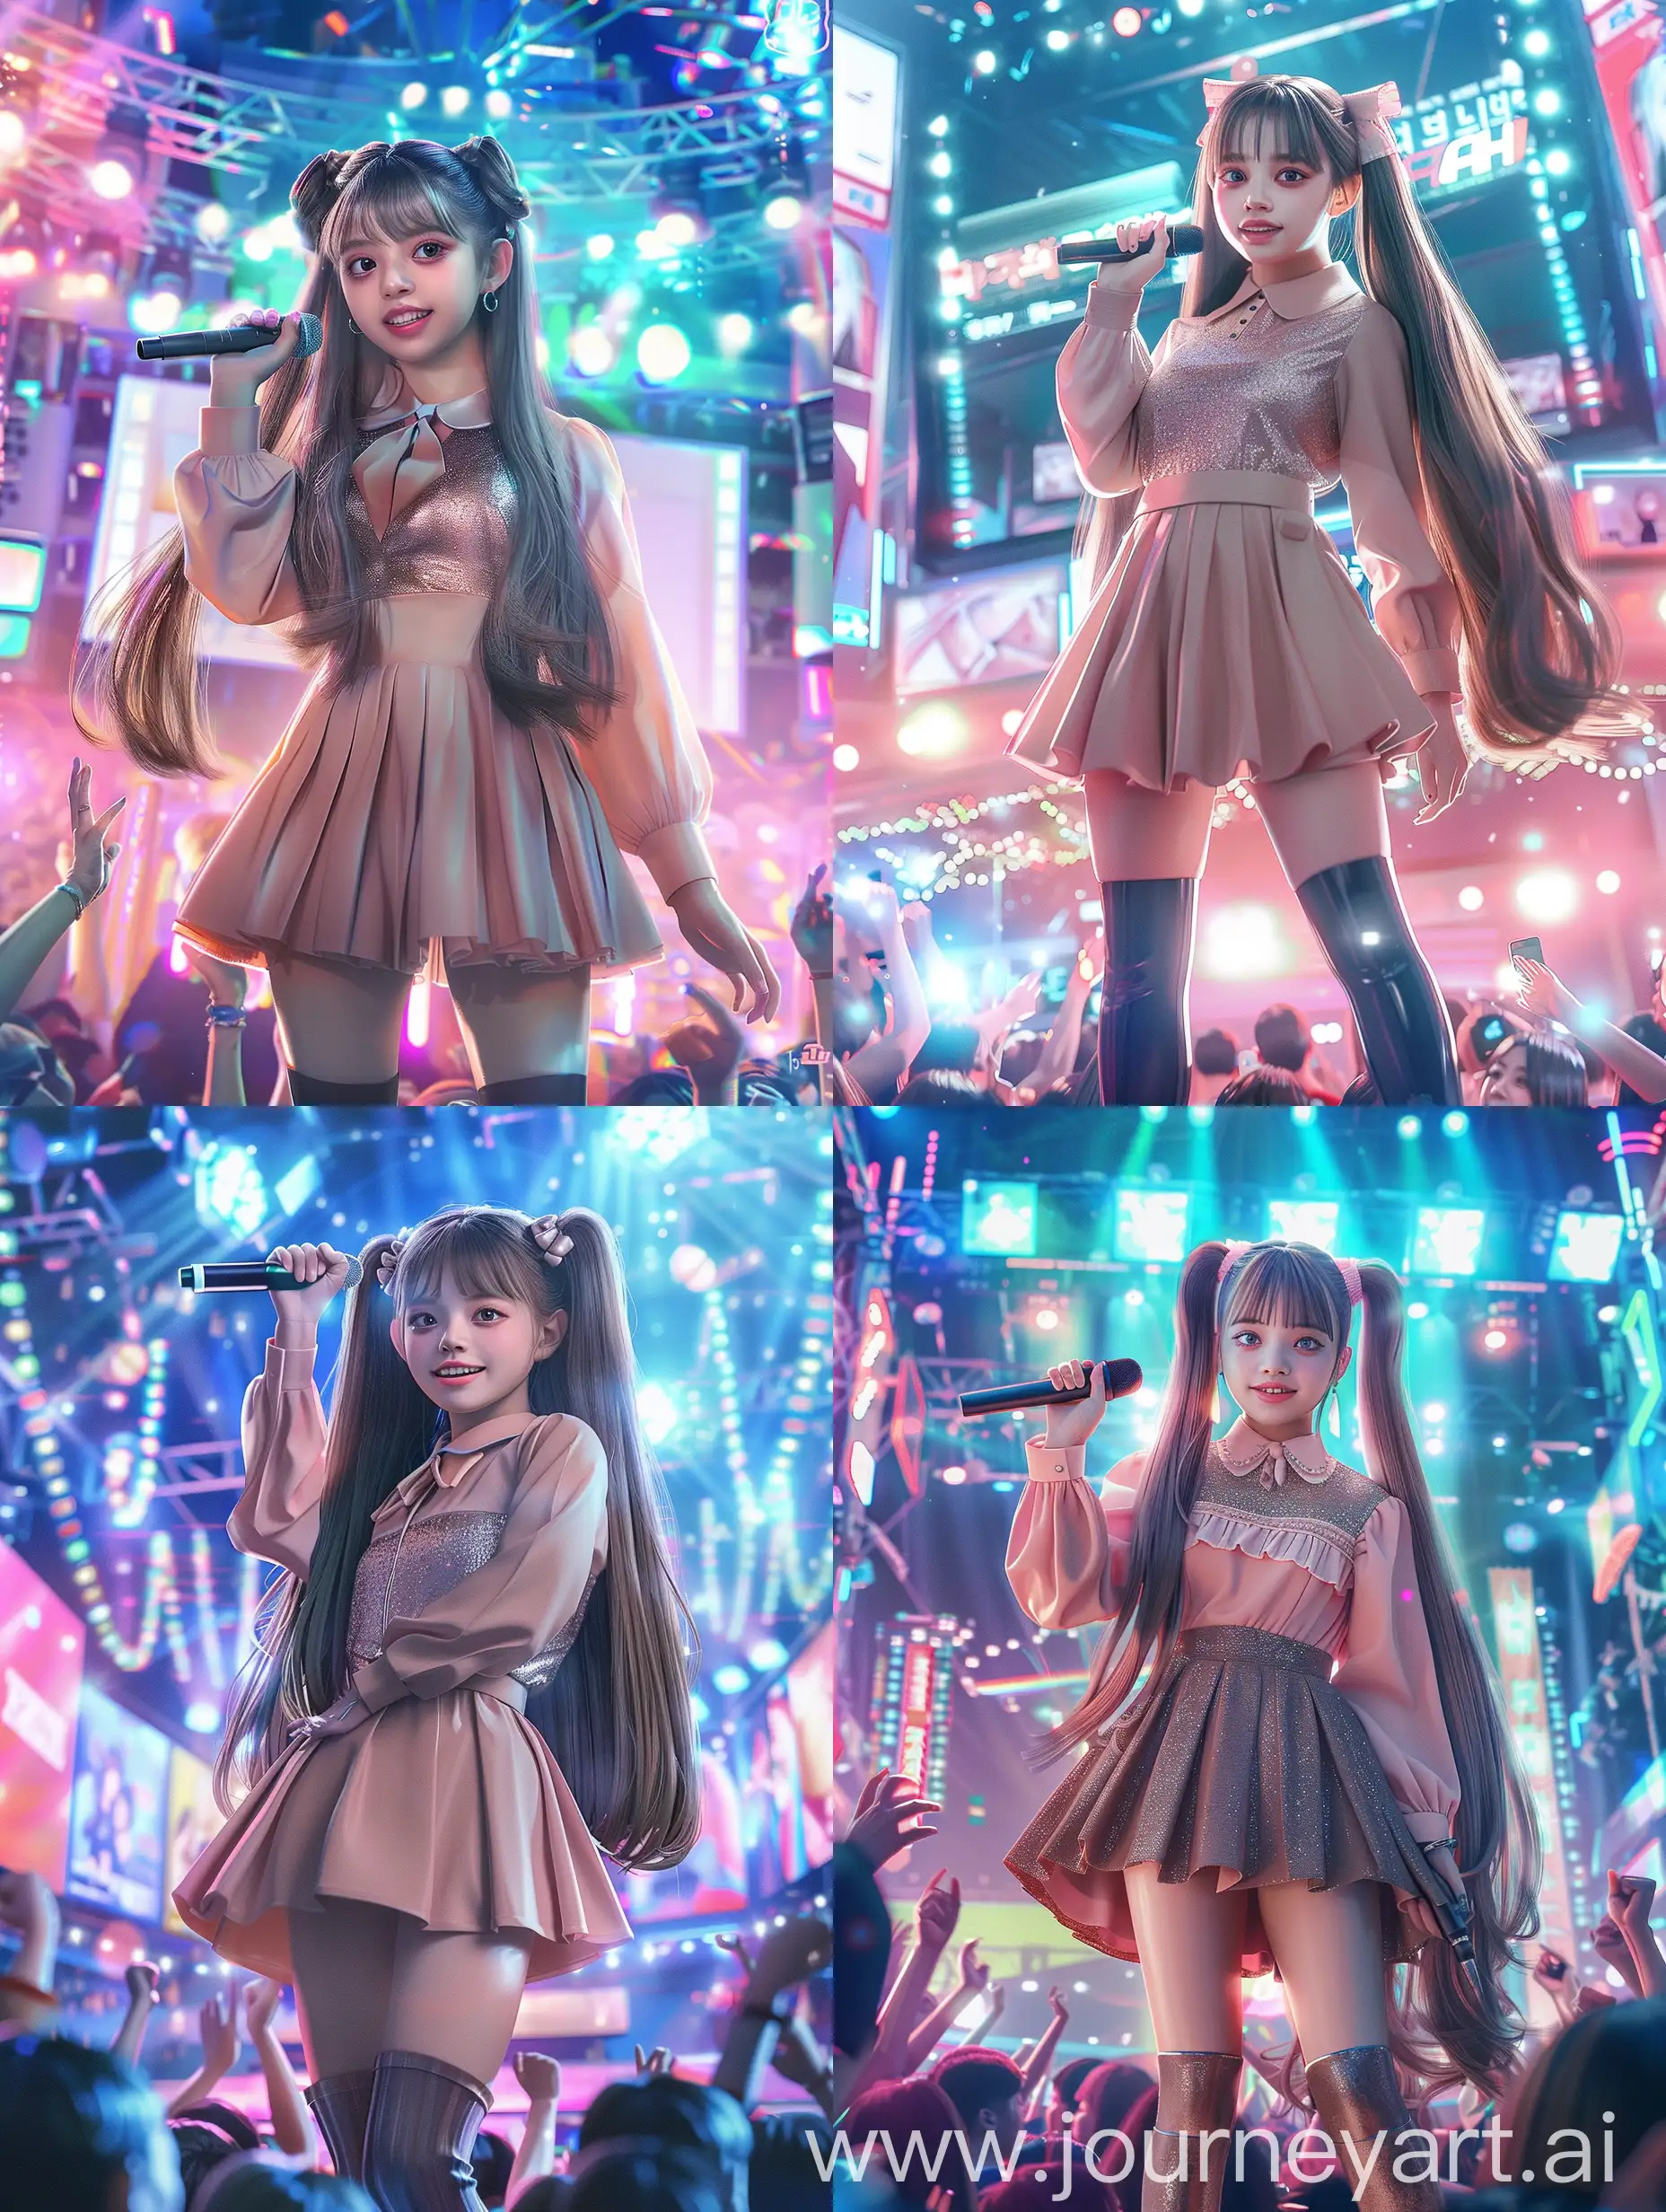 “Please transform the provided photo into an image of a young, energetic Japanese idol standing on a brightly lit stage. She should be holding a microphone in her right hand, with a confident and charming smile. She should have long, flowing black hair styled in loose waves. Her outfit should be stylish and colorful, including a short skirt, a glittery top, and high boots. The background should be filled with vibrant lights and cheering fans. The stage should have a modern design with LED screens displaying dynamic visuals.”